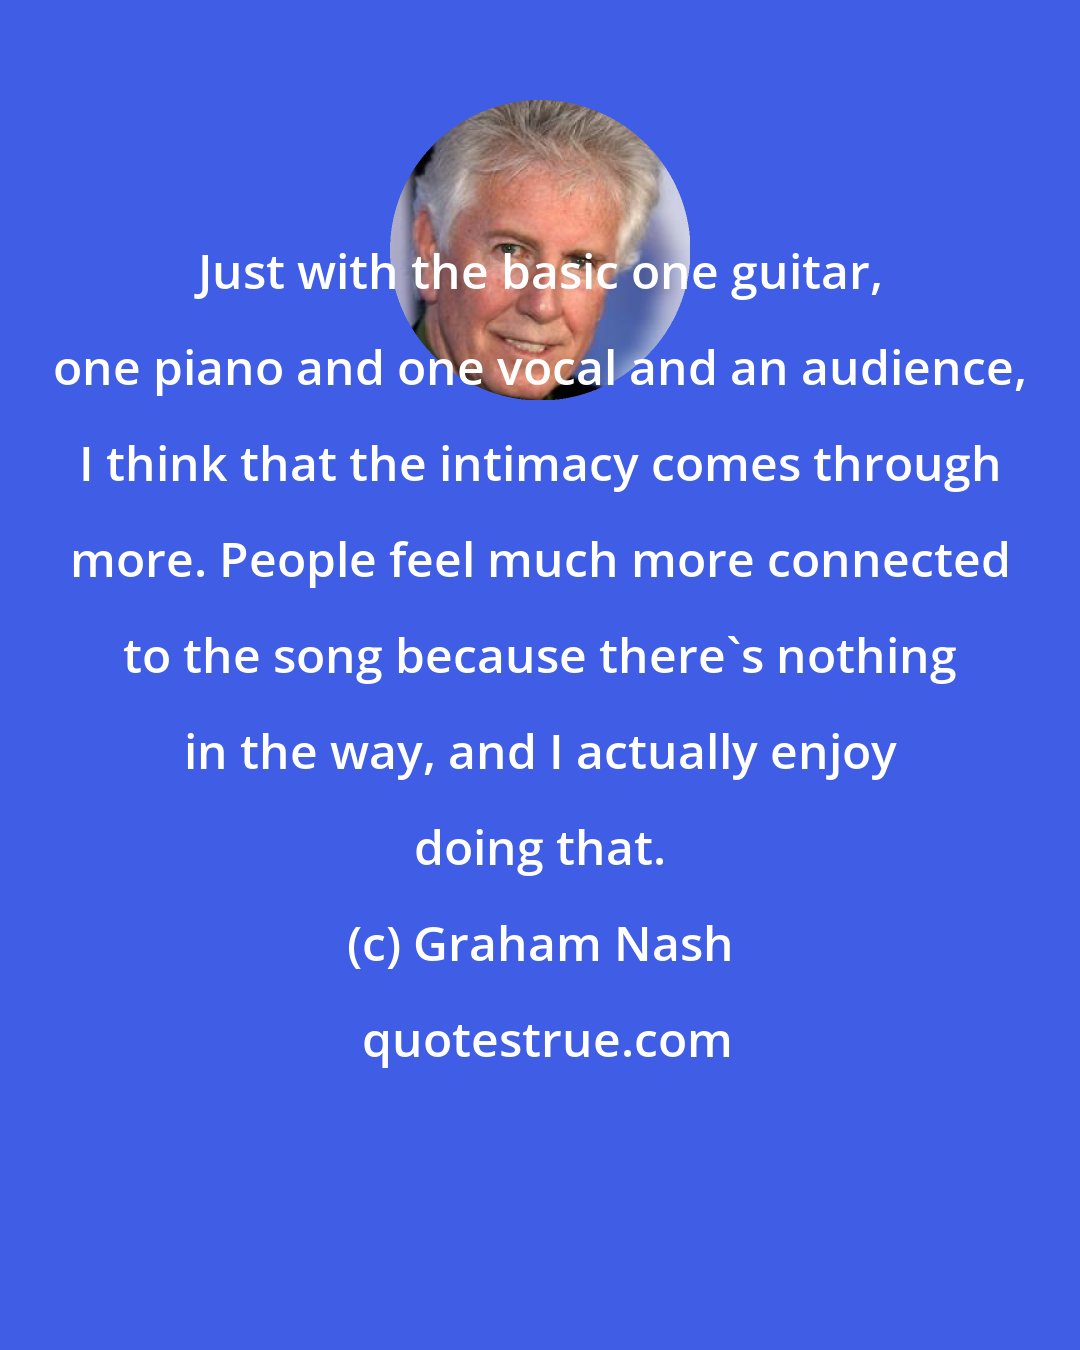 Graham Nash: Just with the basic one guitar, one piano and one vocal and an audience, I think that the intimacy comes through more. People feel much more connected to the song because there's nothing in the way, and I actually enjoy doing that.